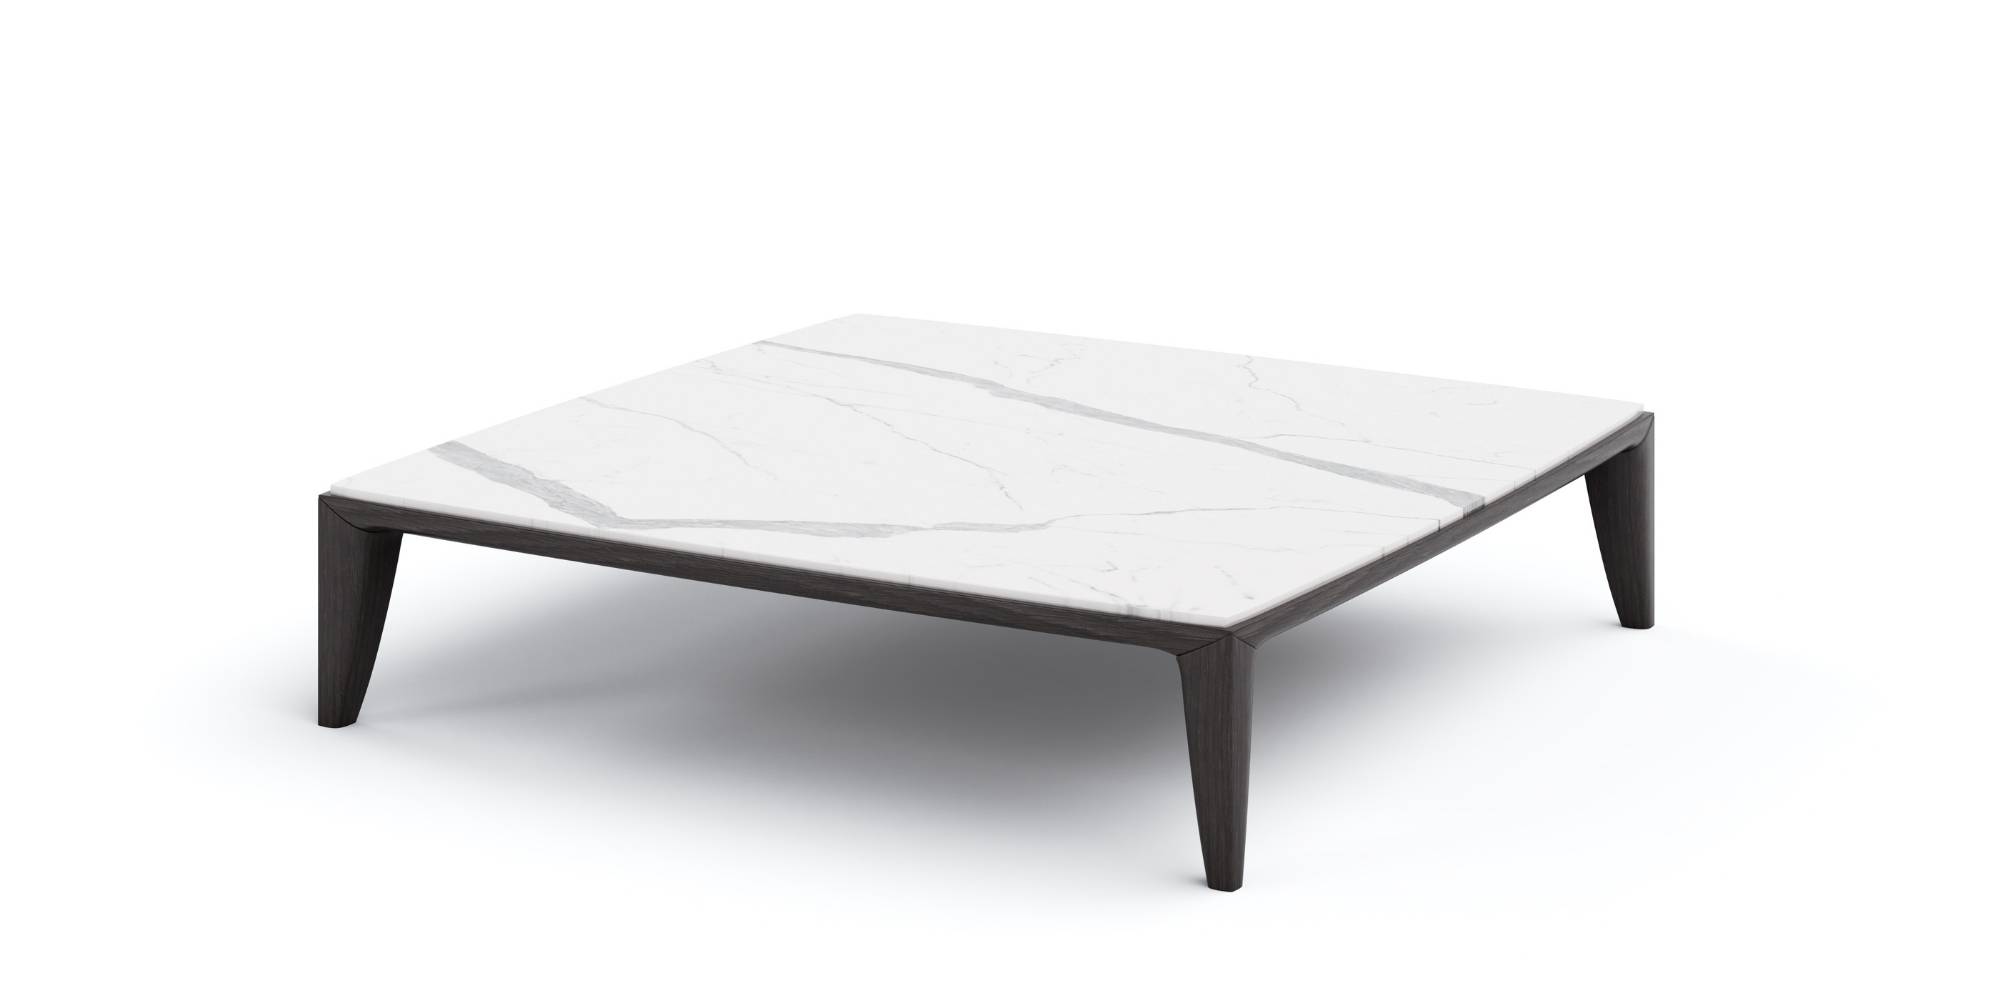 Tuscana Coffee Table 60 – Medium in Outdoor Tables Coffee Tables for Asteri Lusso collection